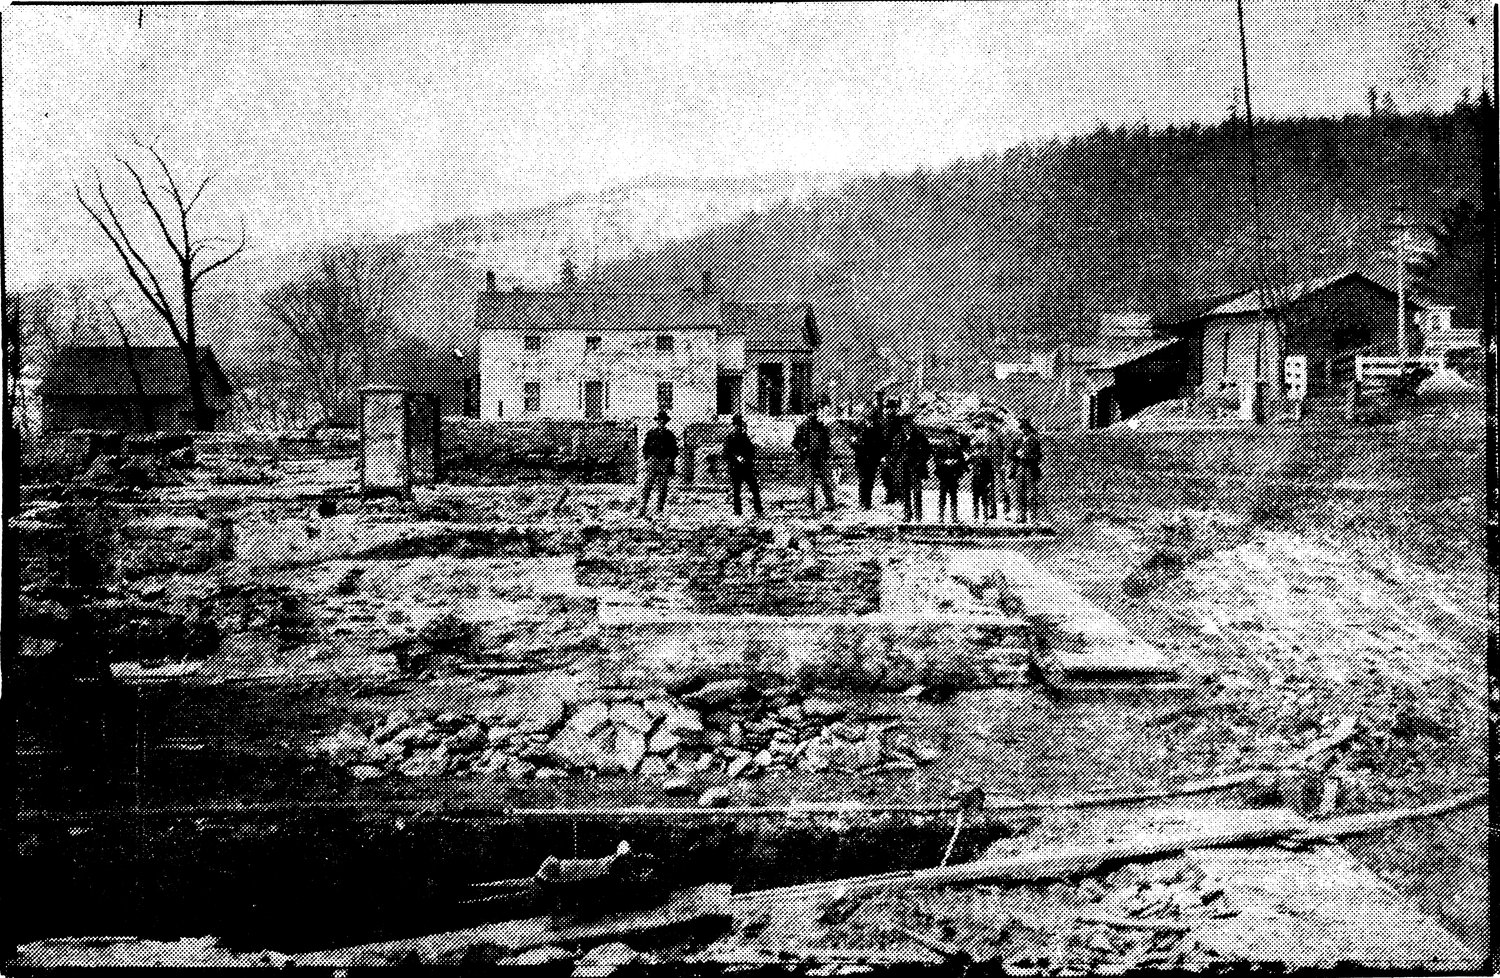 The day after the 1888 Main Street fire in Callicoon.